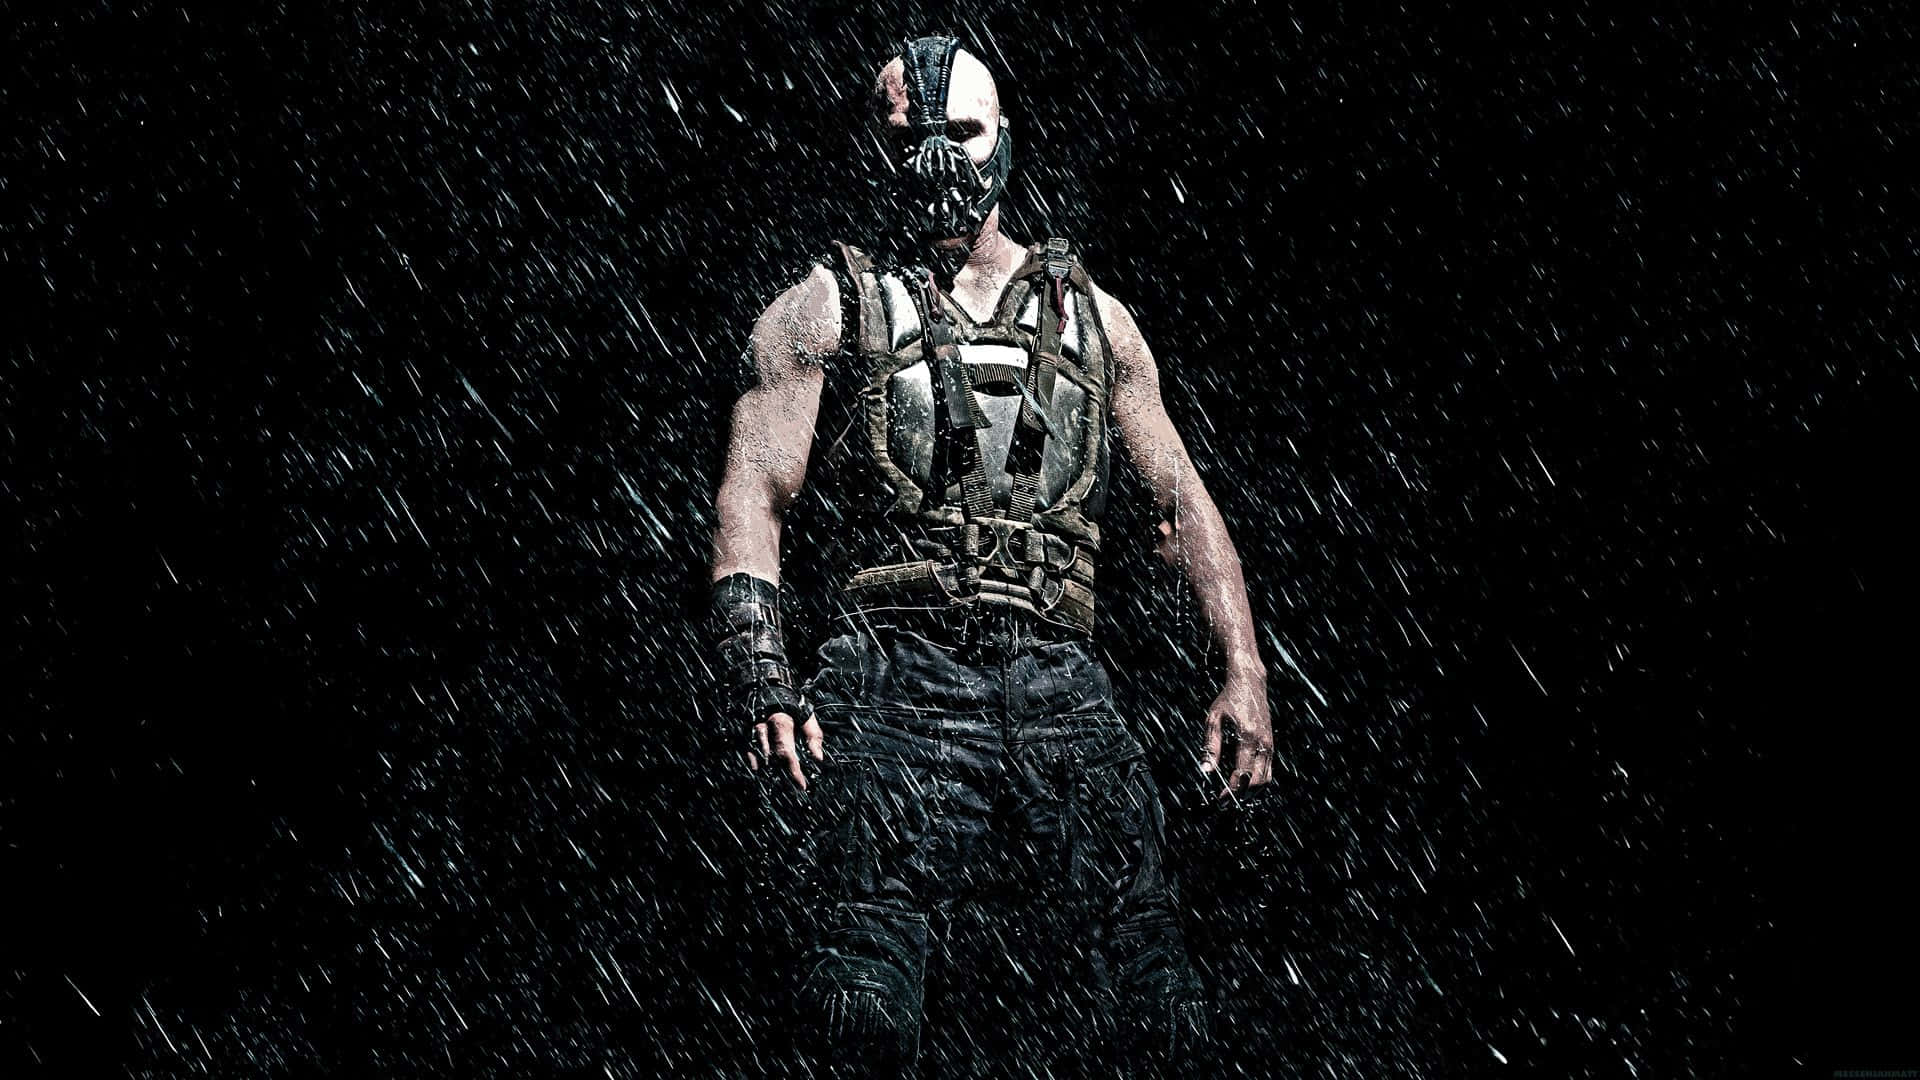 "Rise UP with Bane" Wallpaper